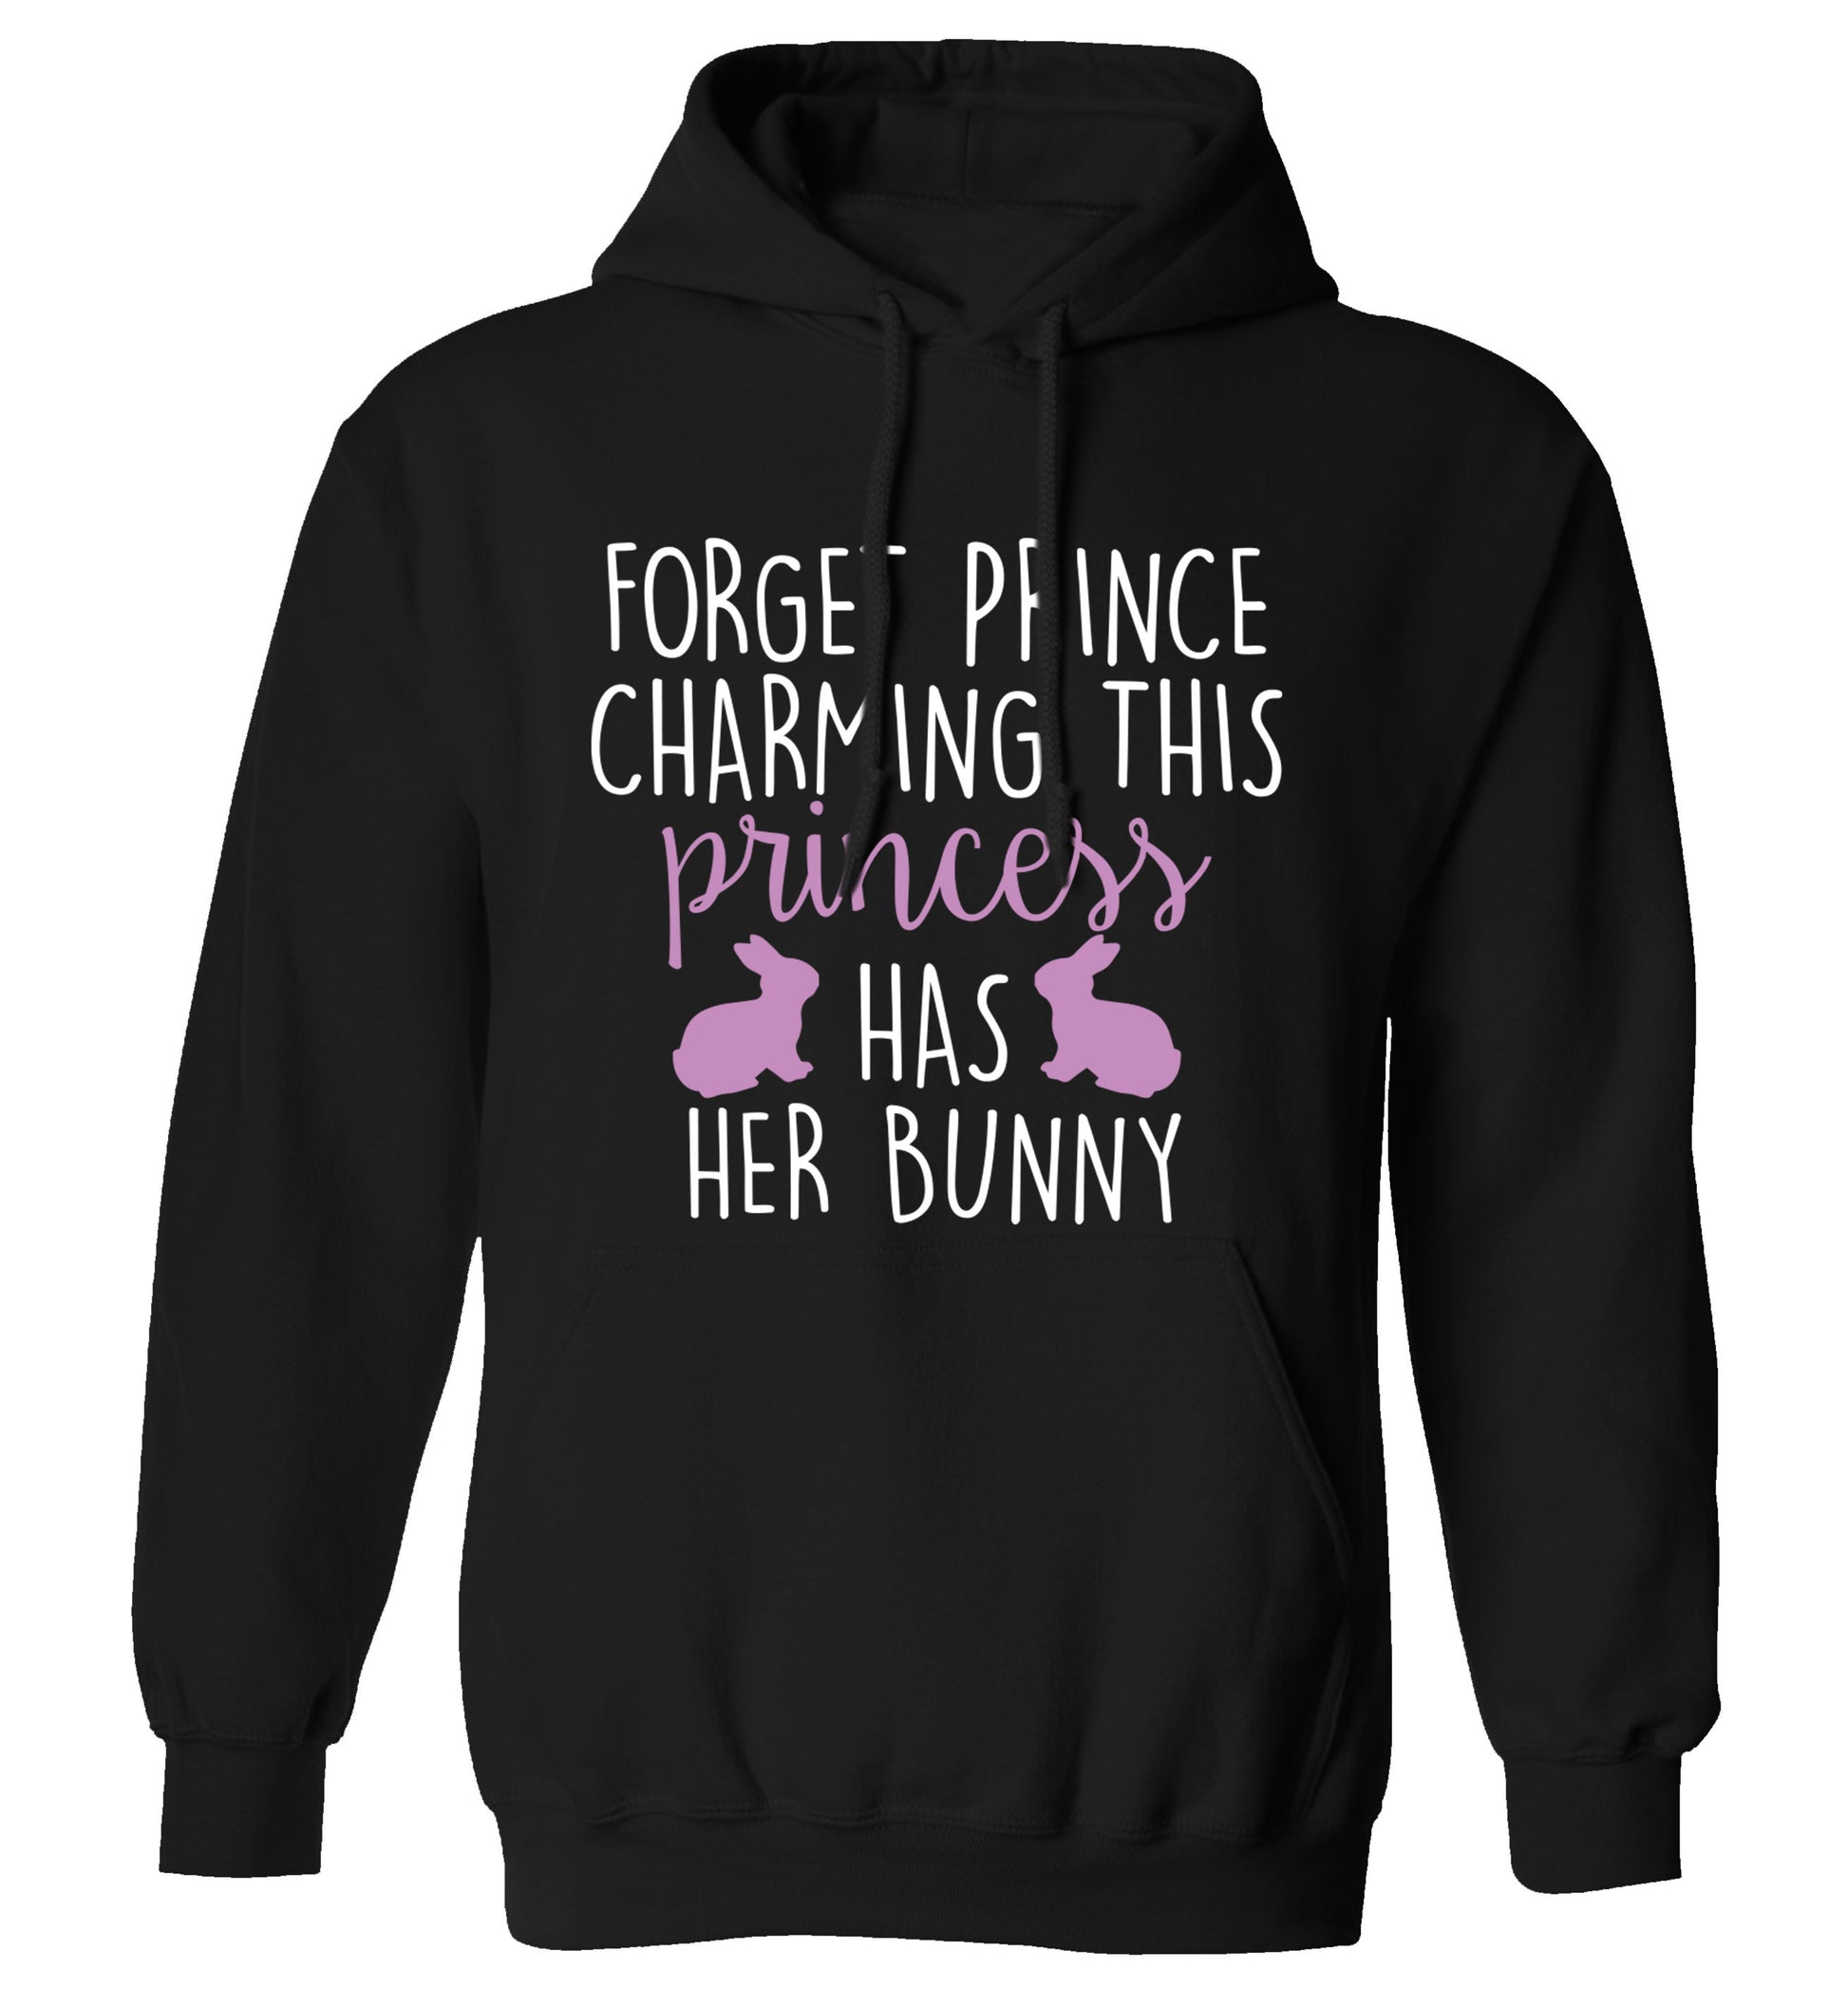 Forget prince charming this princess has her bunny adults unisex black hoodie 2XL